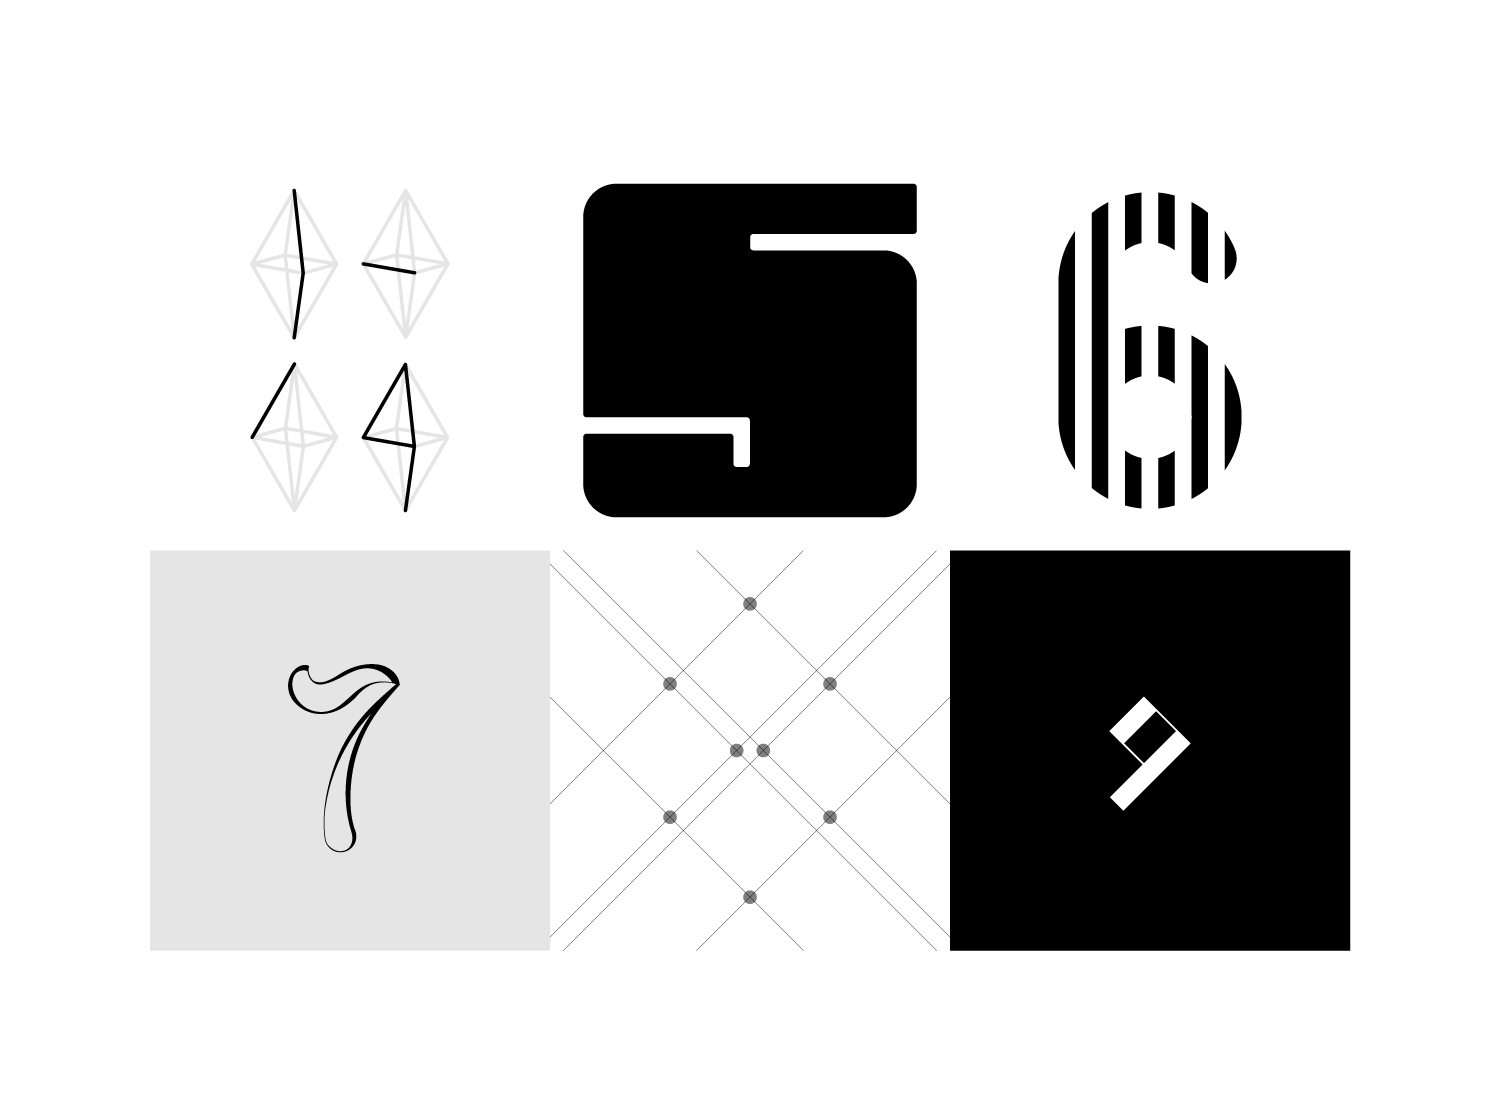 36 days of type - 4 to 9 by Viktor Lanneld